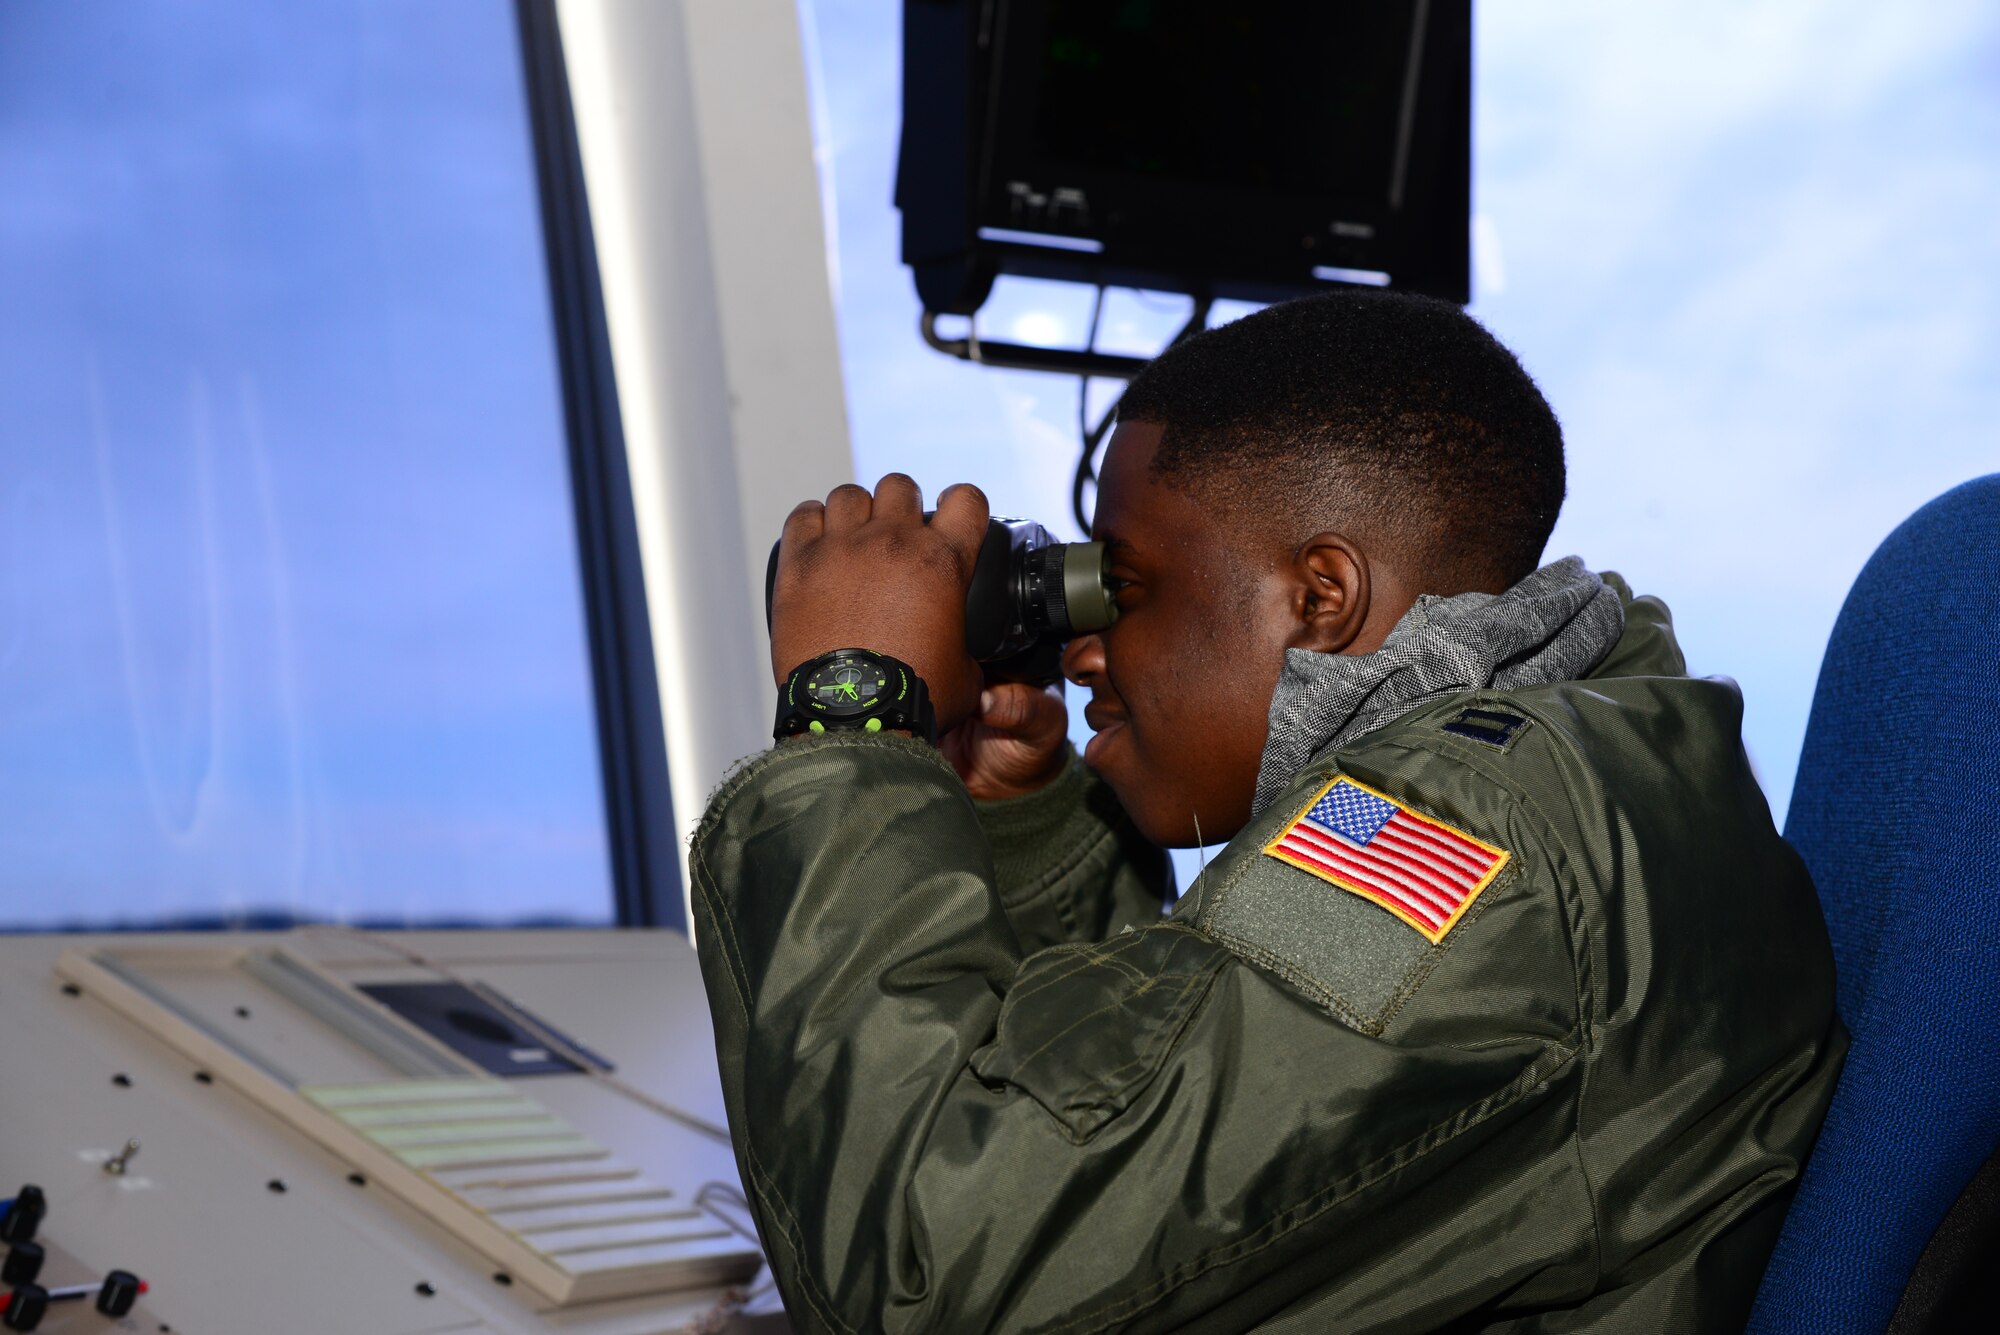 Kareem Bennett “glasses” the horizon March 16, 2018, from the 436th Operations Support Squadron air traffic control tower on Dover Air Force Base, Del. Bennett spent the day touring the installation with members of the 3rd Airlift Squadron as an honorary pilot for the day. (U.S. Air Force photo by Staff Sgt. Aaron J. Jenne)